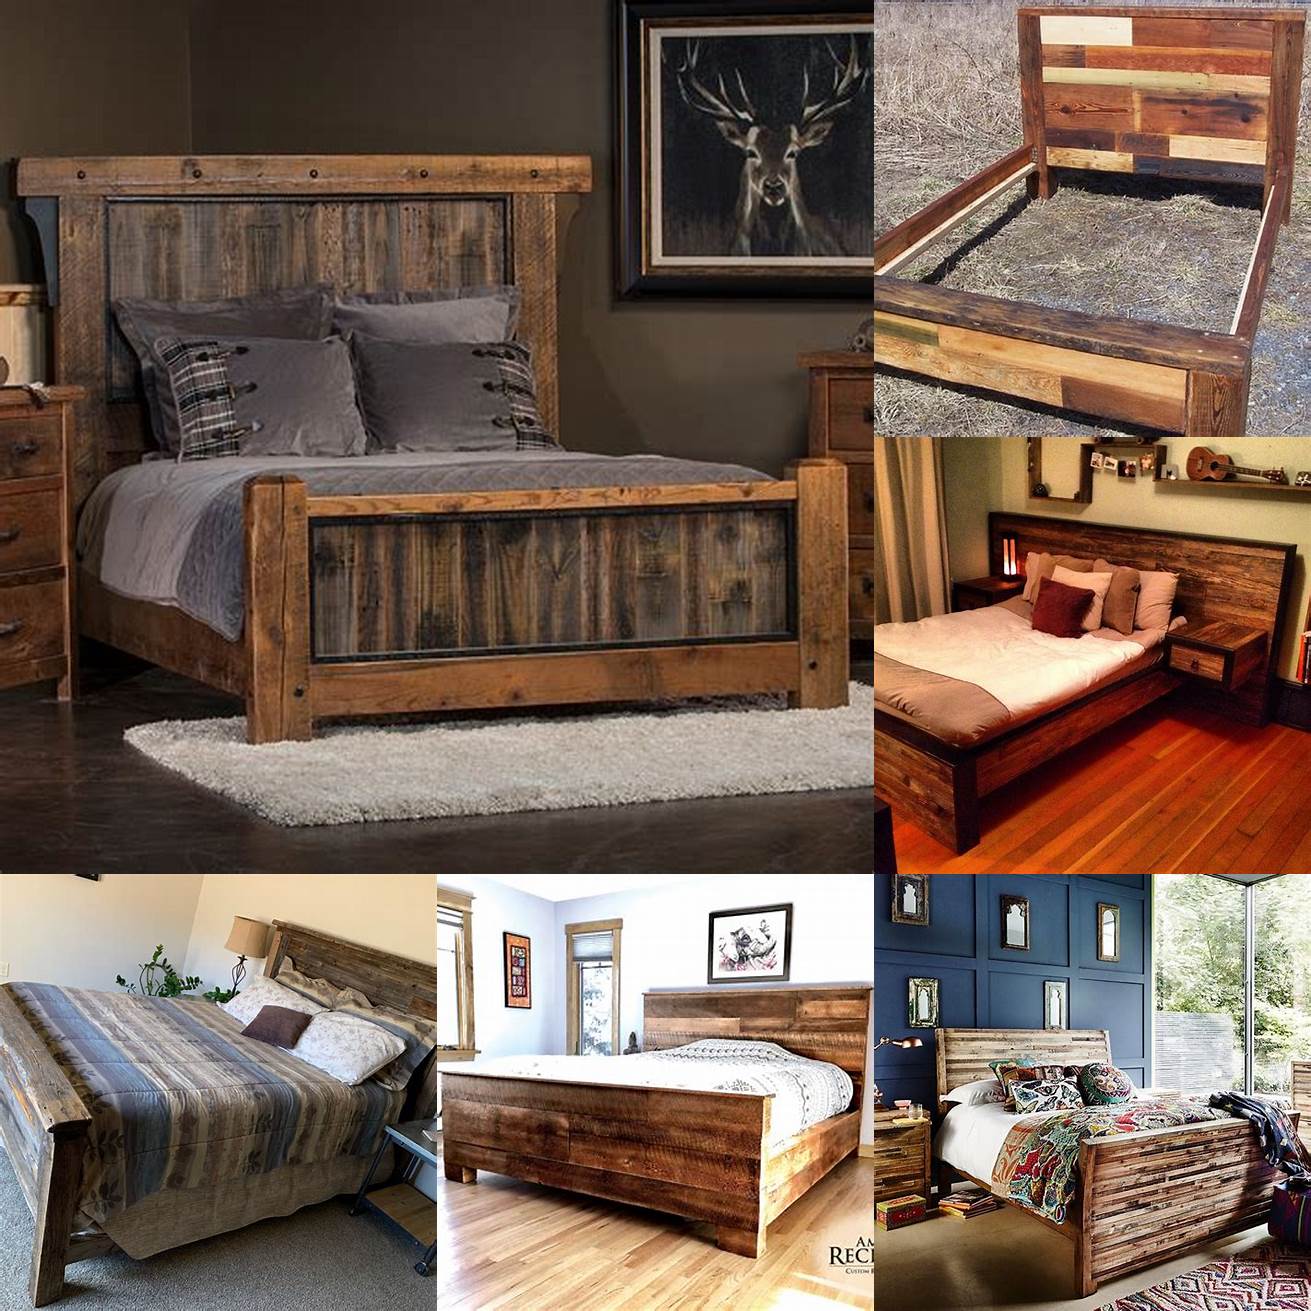 Image of a reclaimed wood bed frame with a colorful quilt